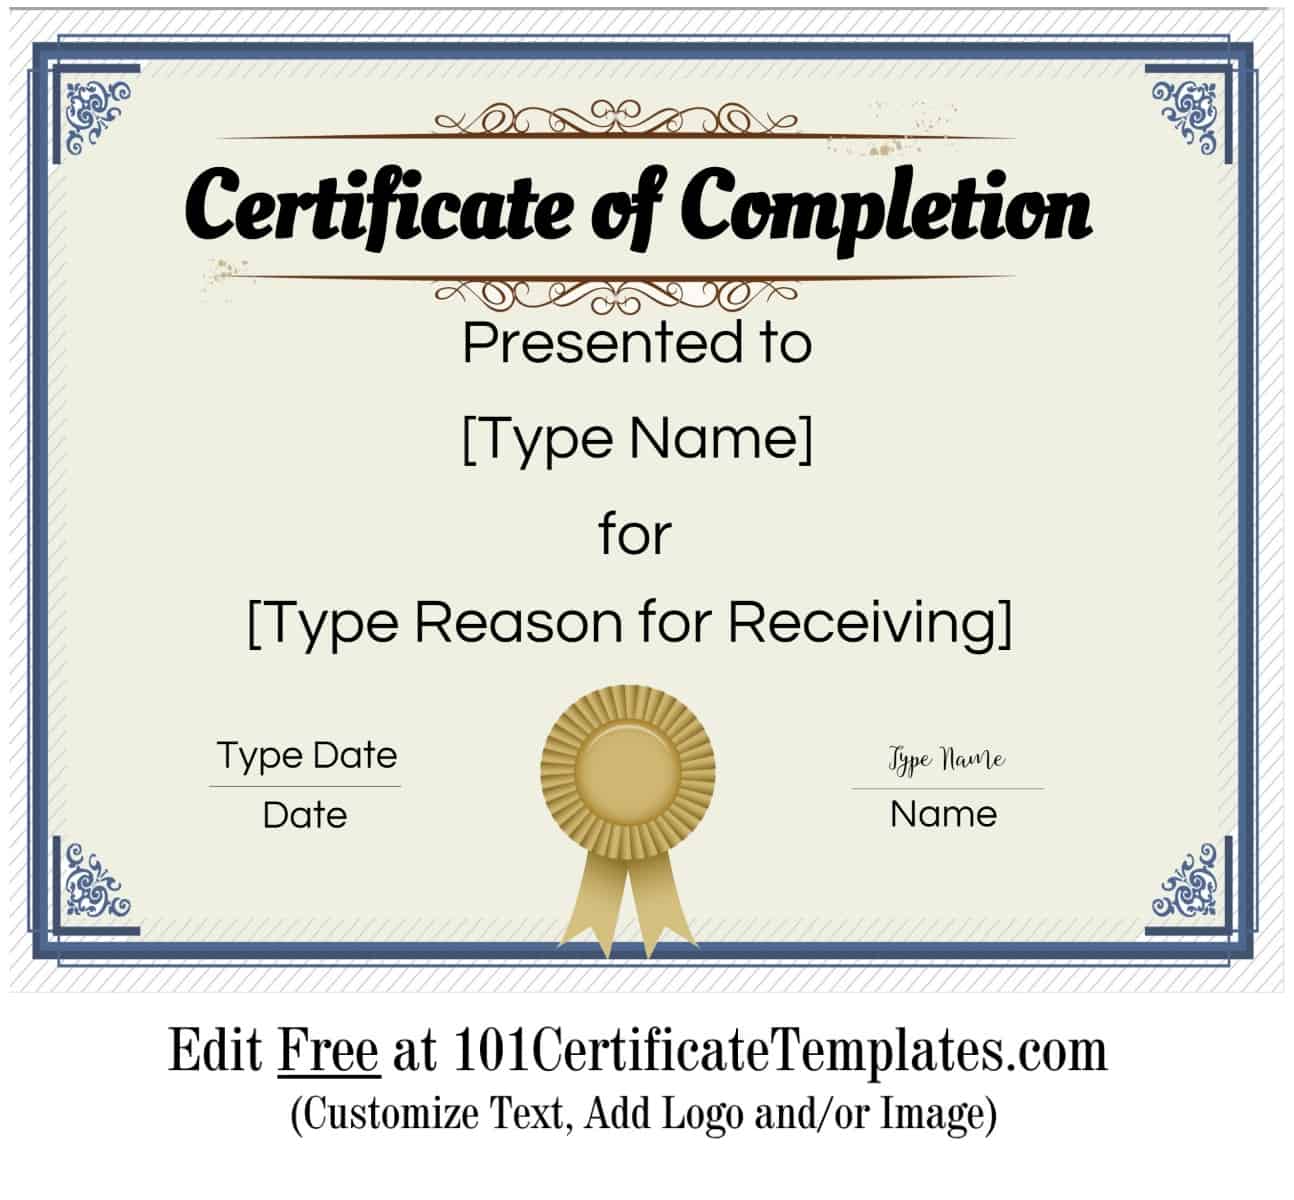 Free Certificate Of Completion Customize Online Then Print